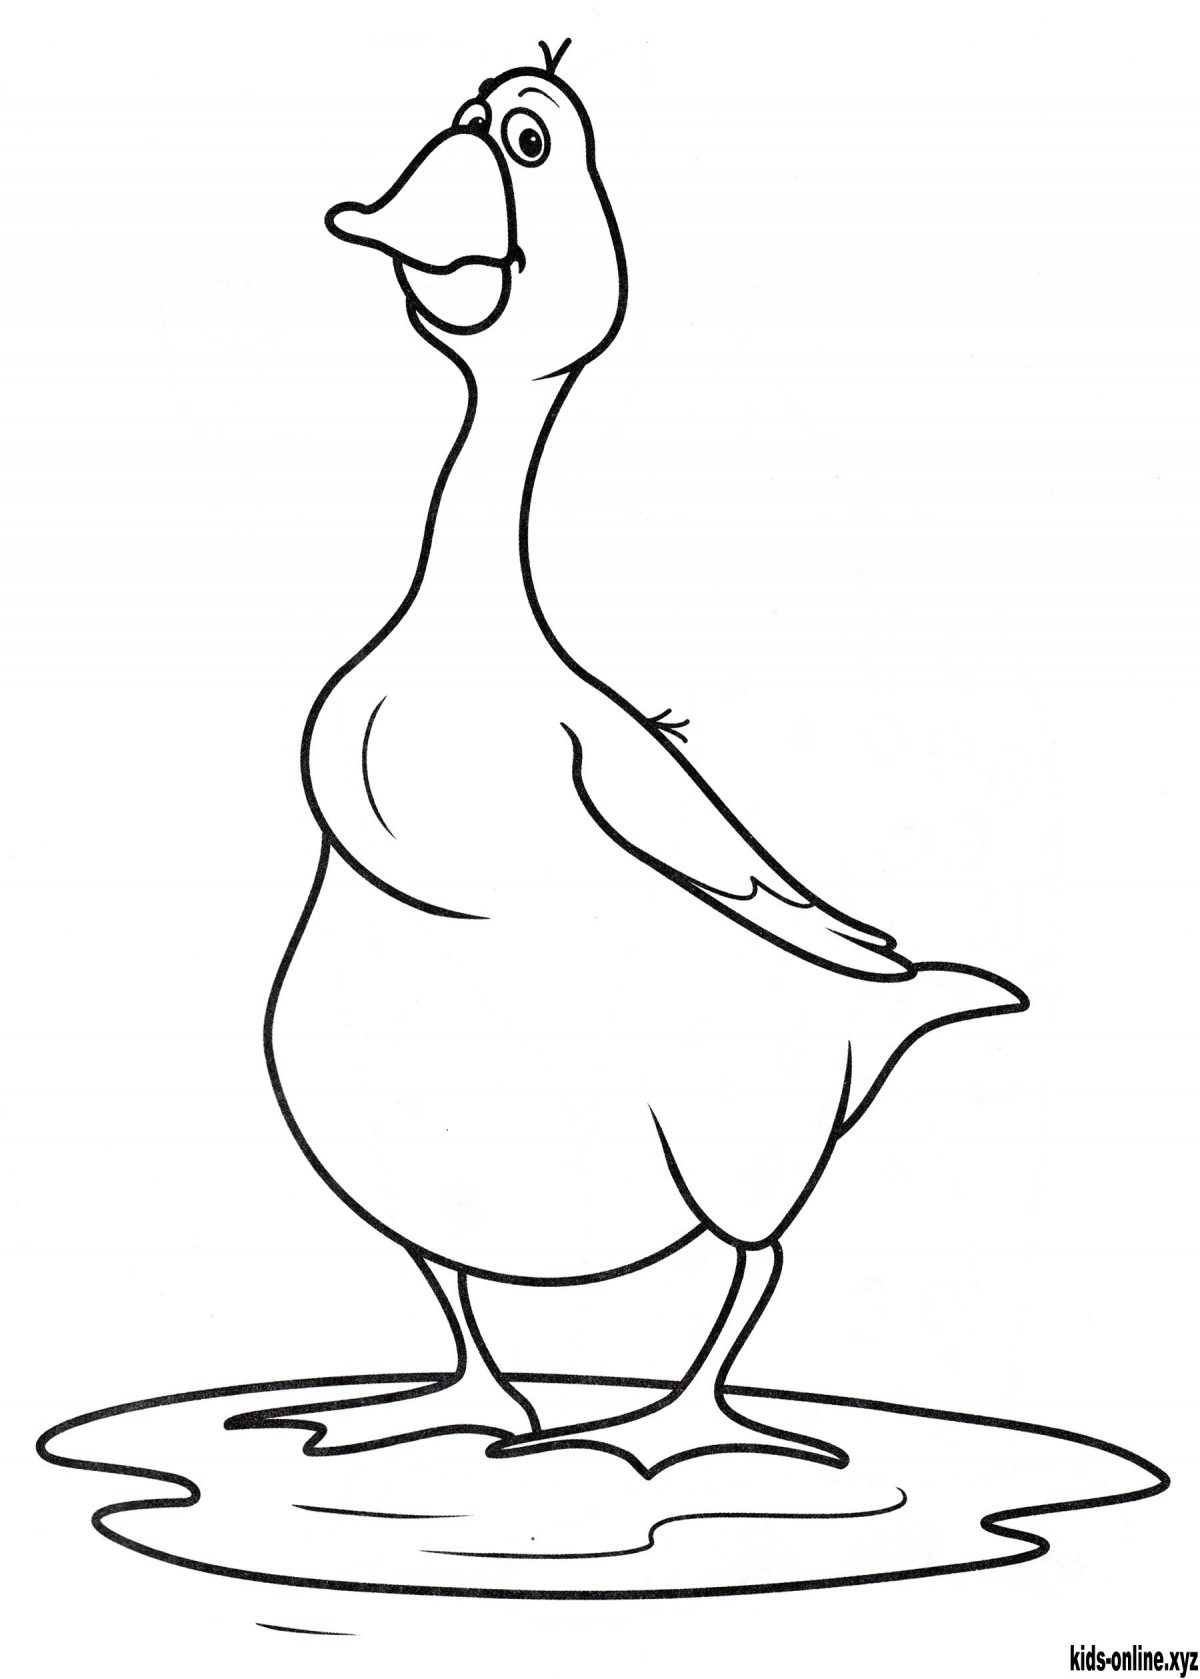 Goose coloring pages – Kids Online – Free Printable Coloring Pages